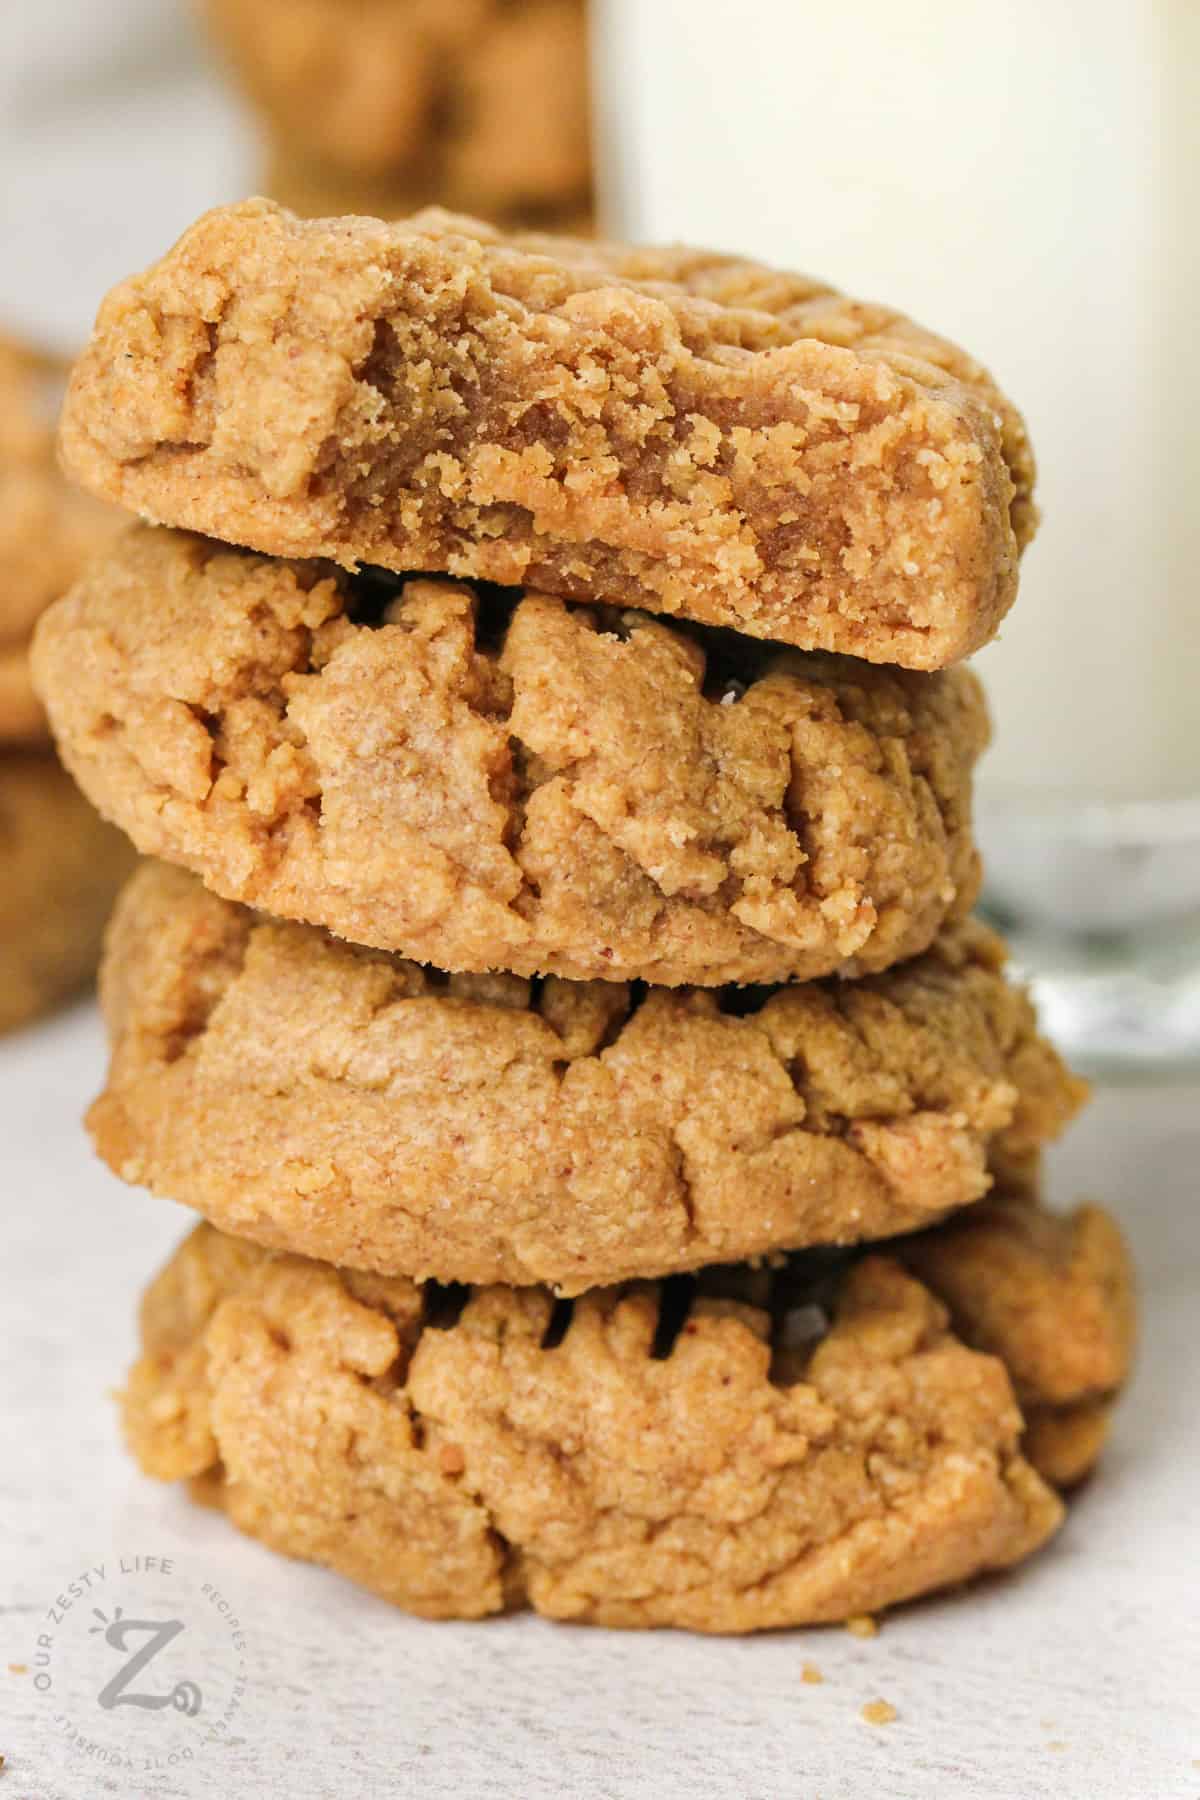 pile of Flourless Peanut Butter Cookies with a bite taken out of one